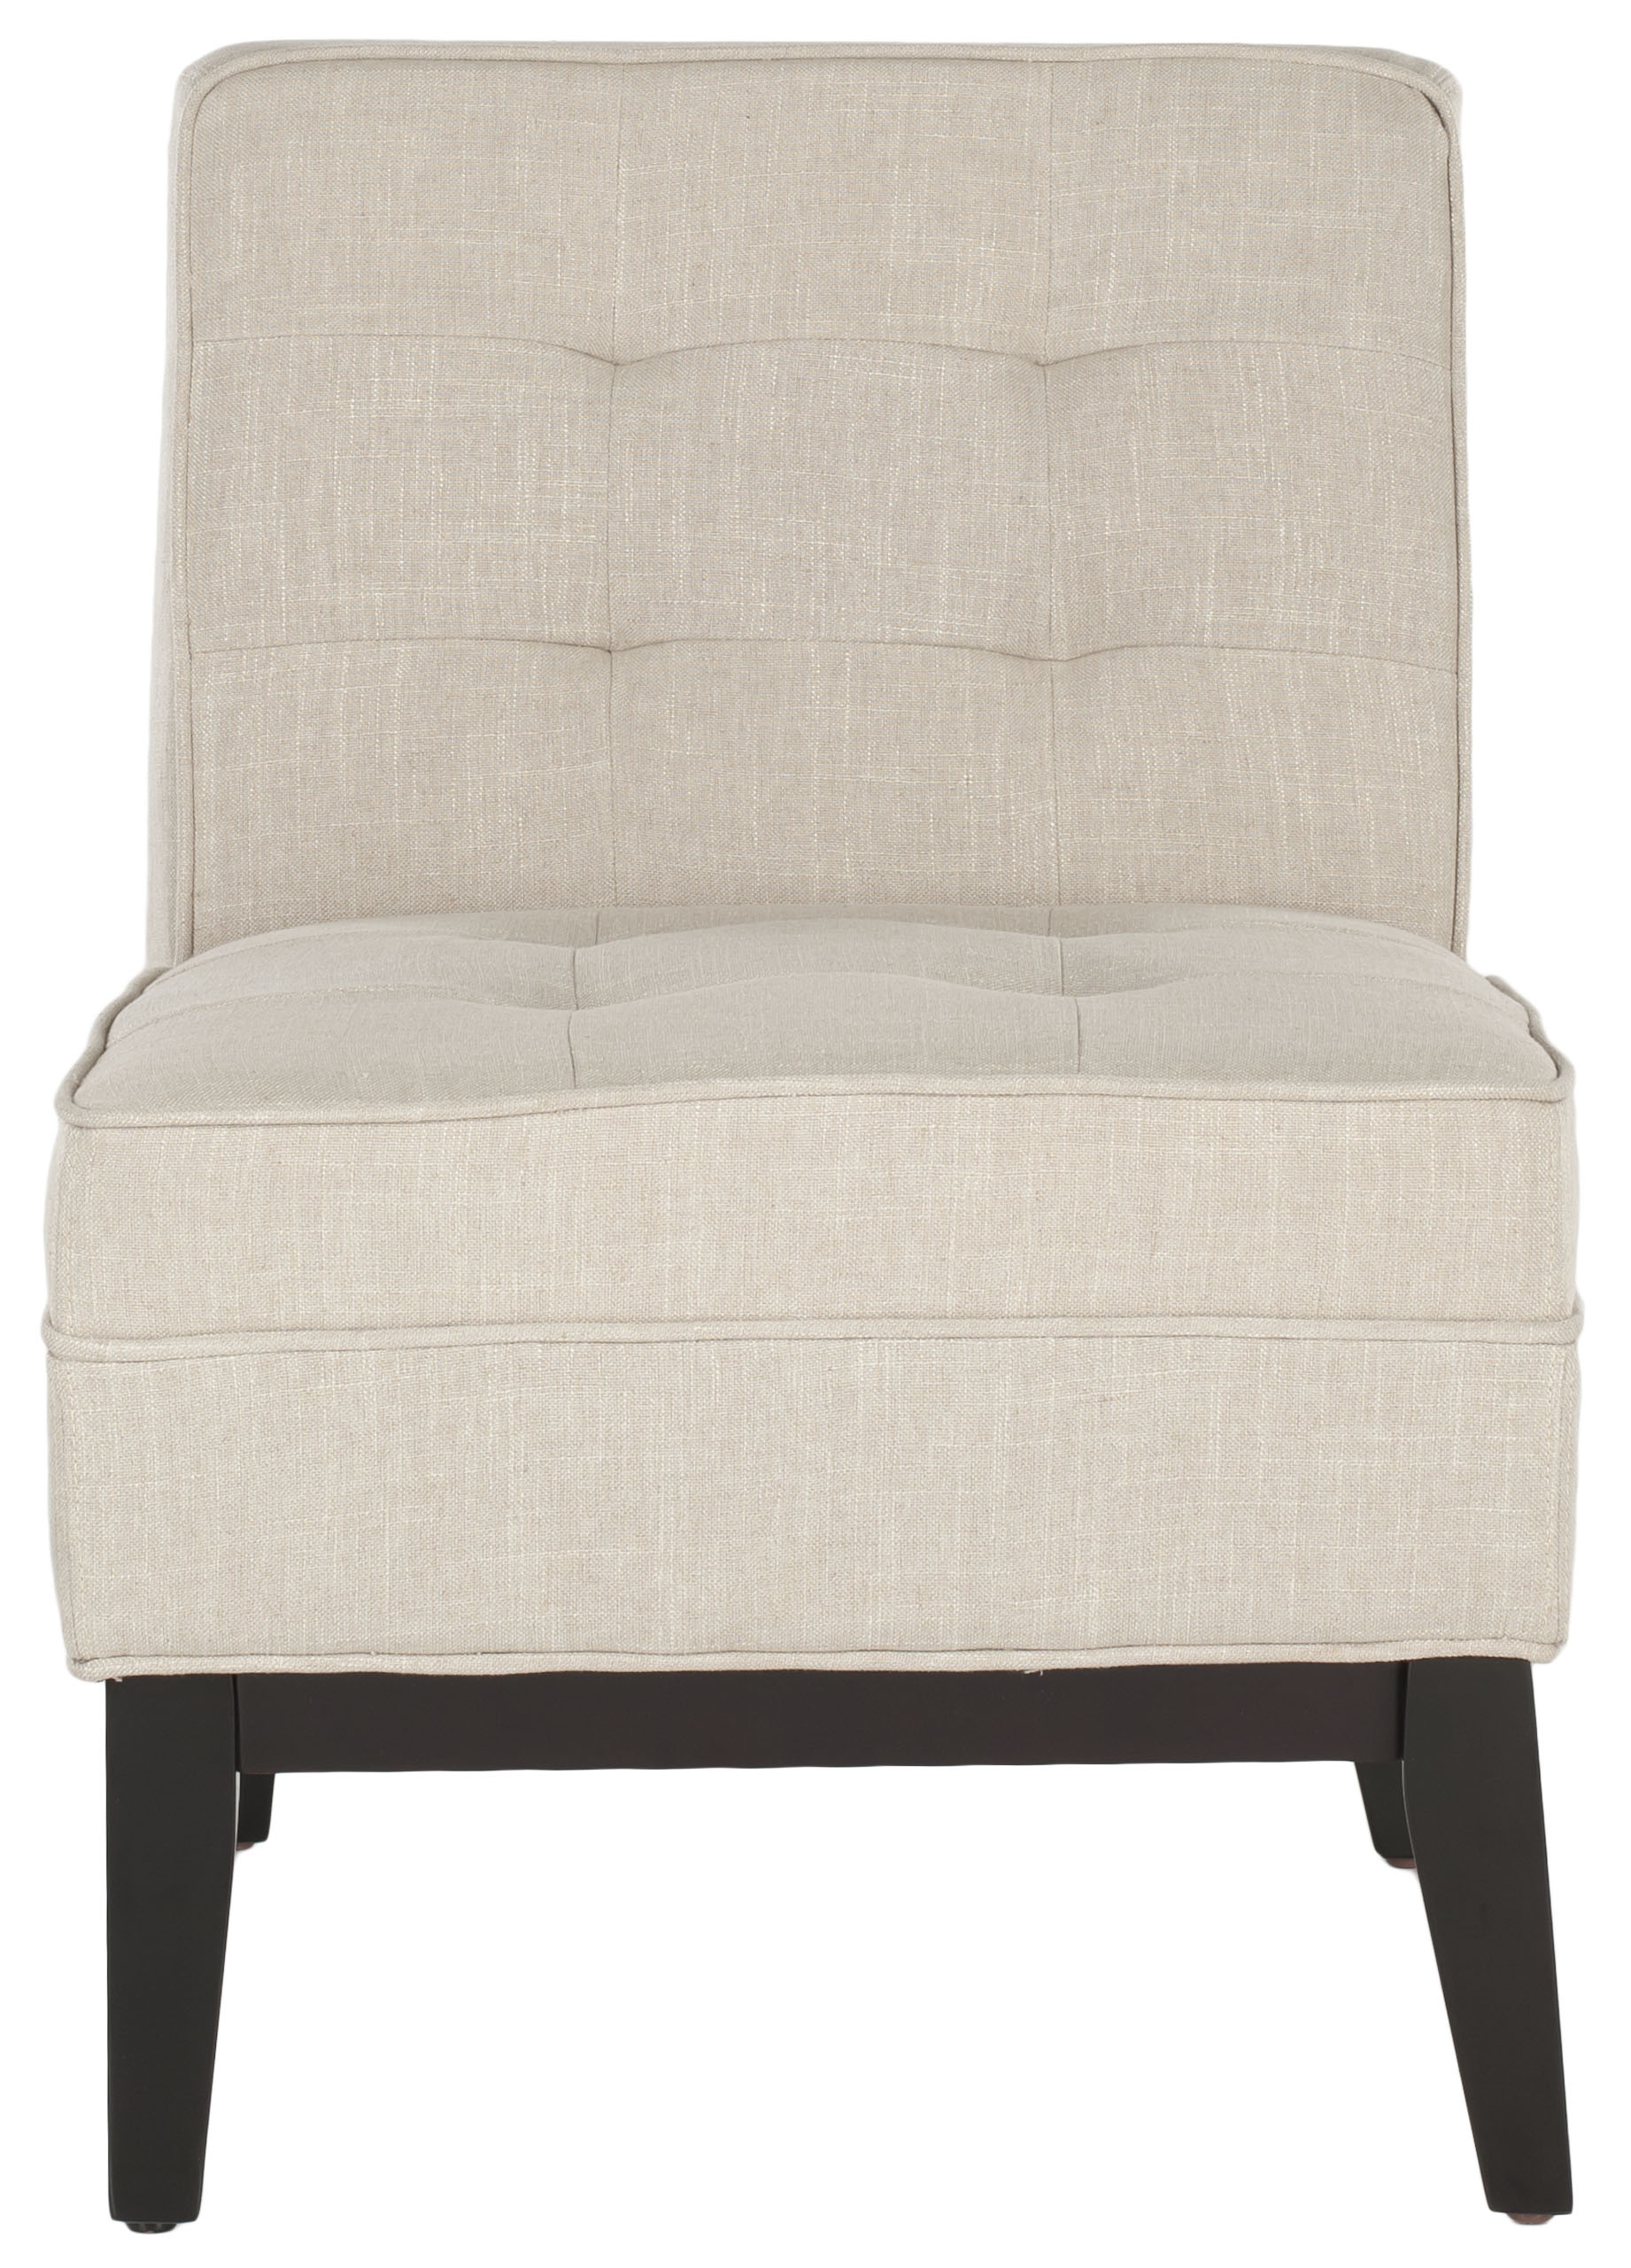 Angel Tufted Armless Club Chair - Off White - Arlo Home - Image 0